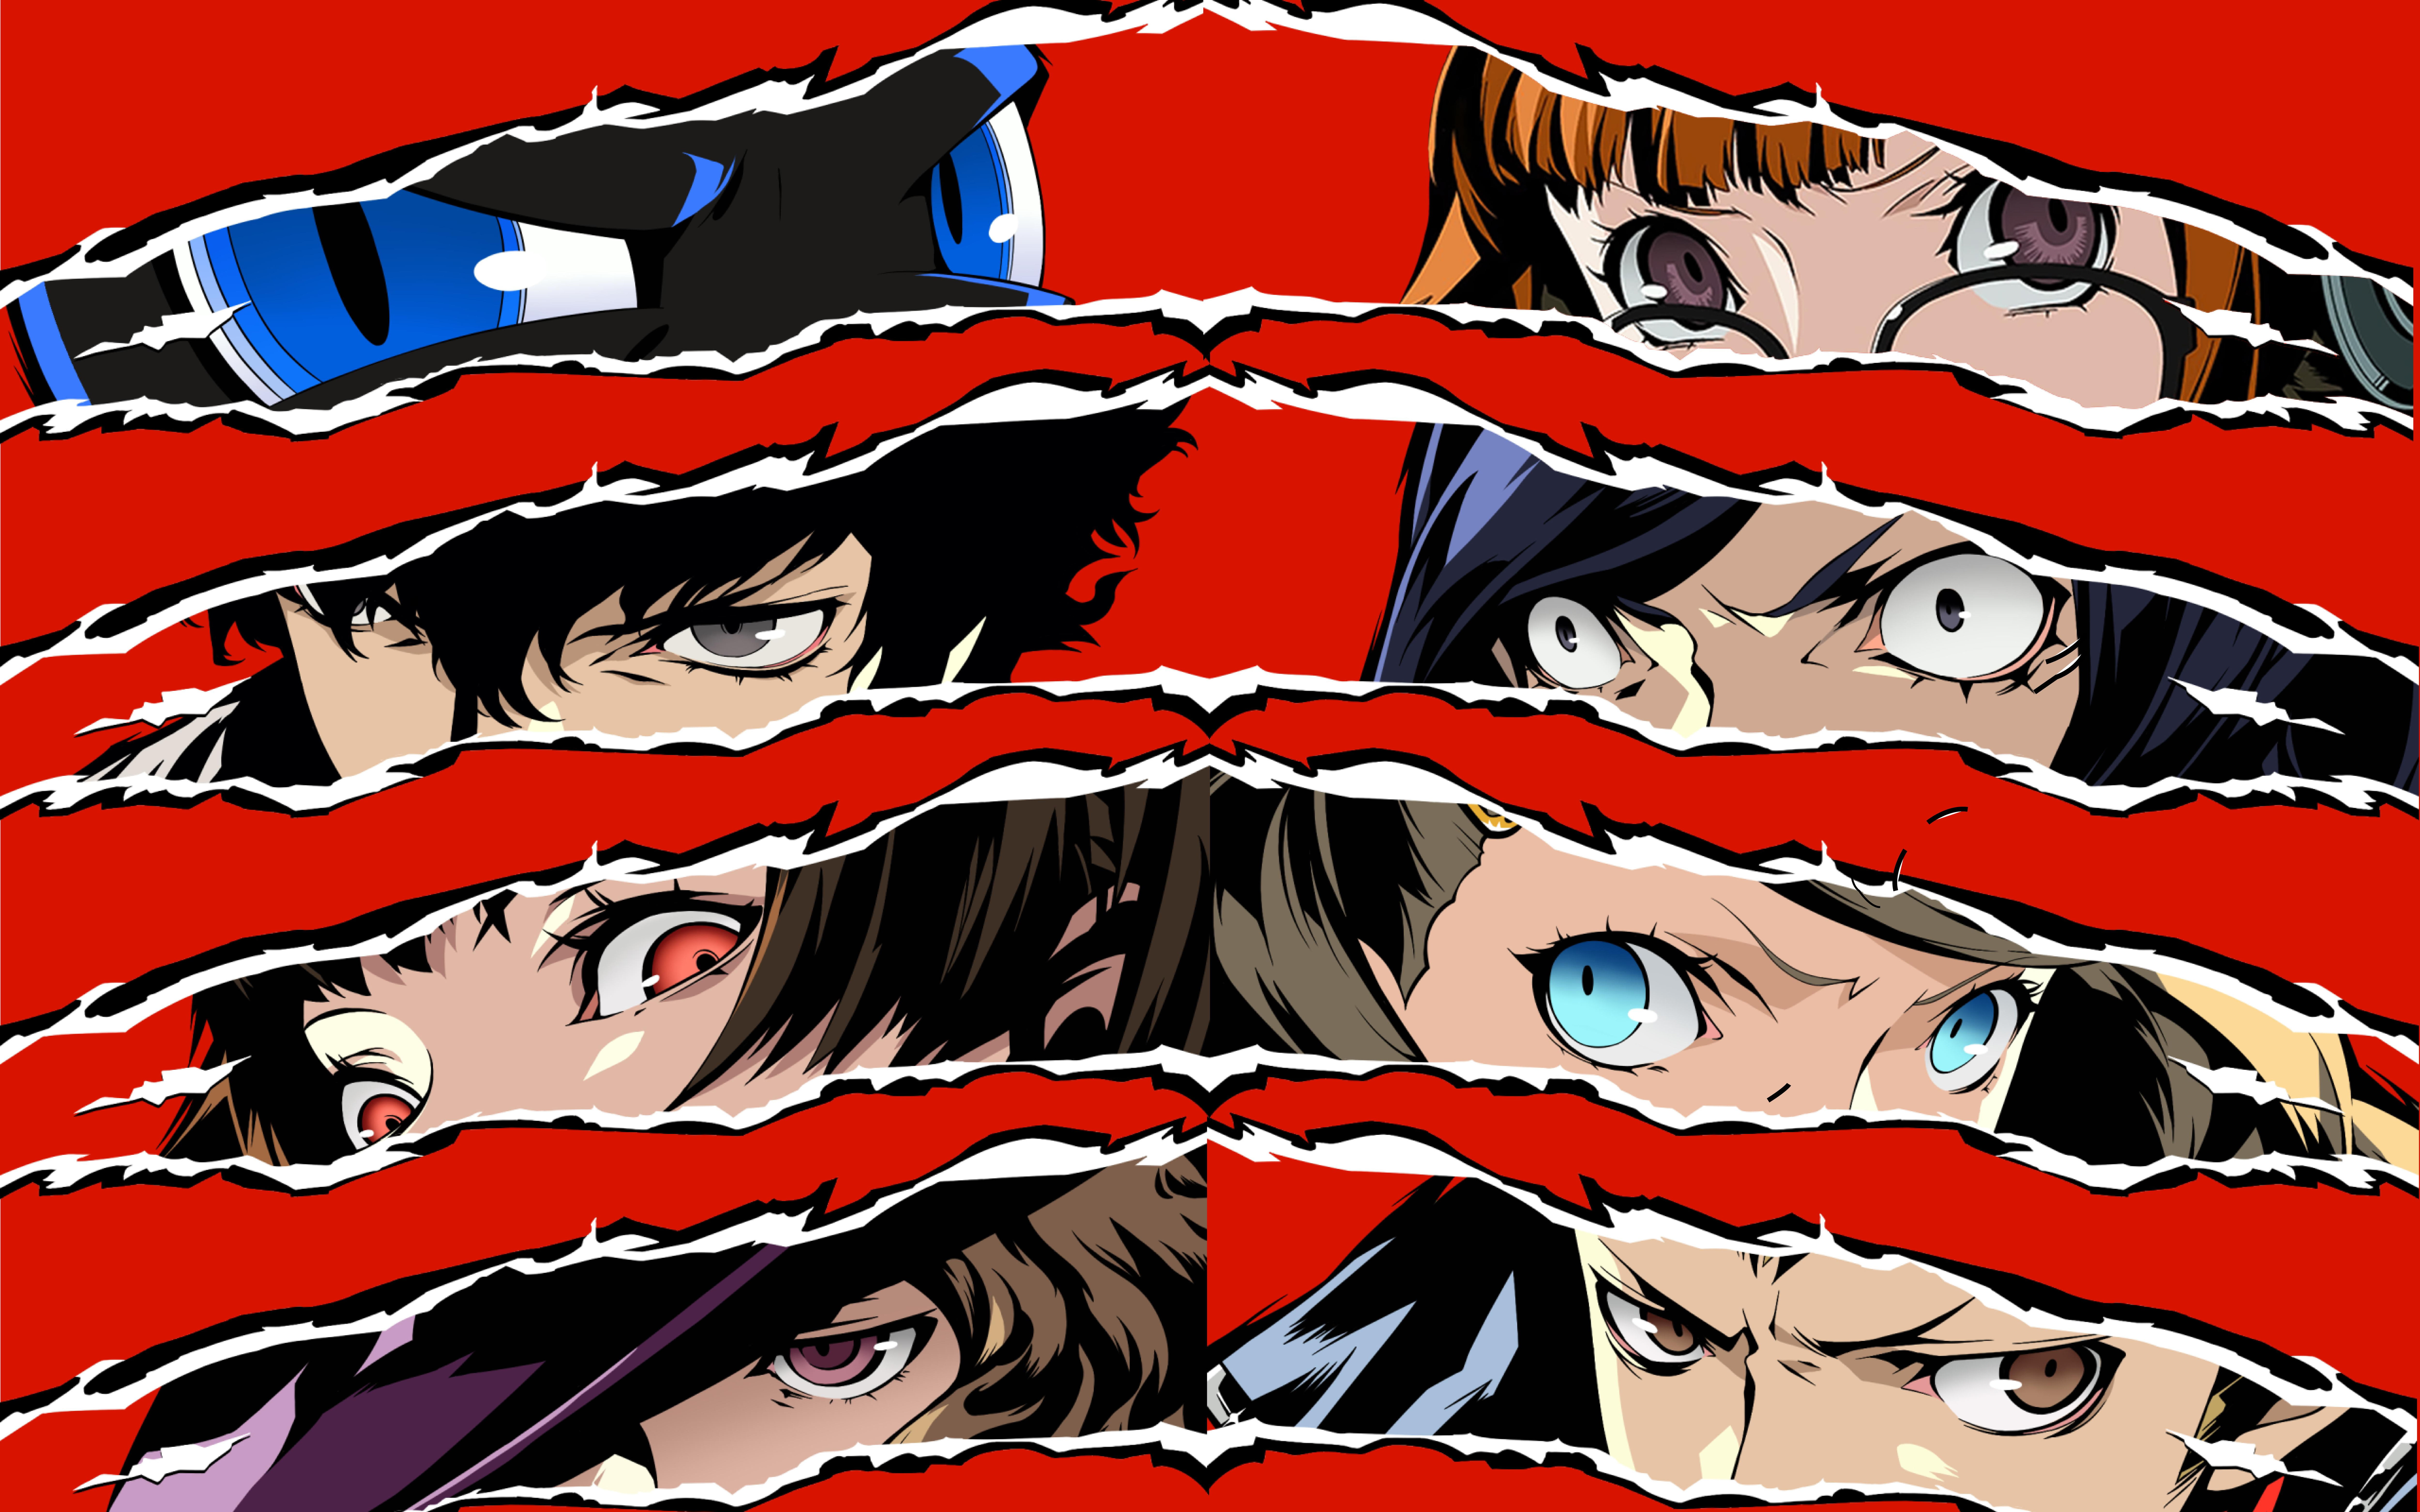 A New HD Cut In Wallpaper And An HD Copy Of The Phantom Thieves Logo